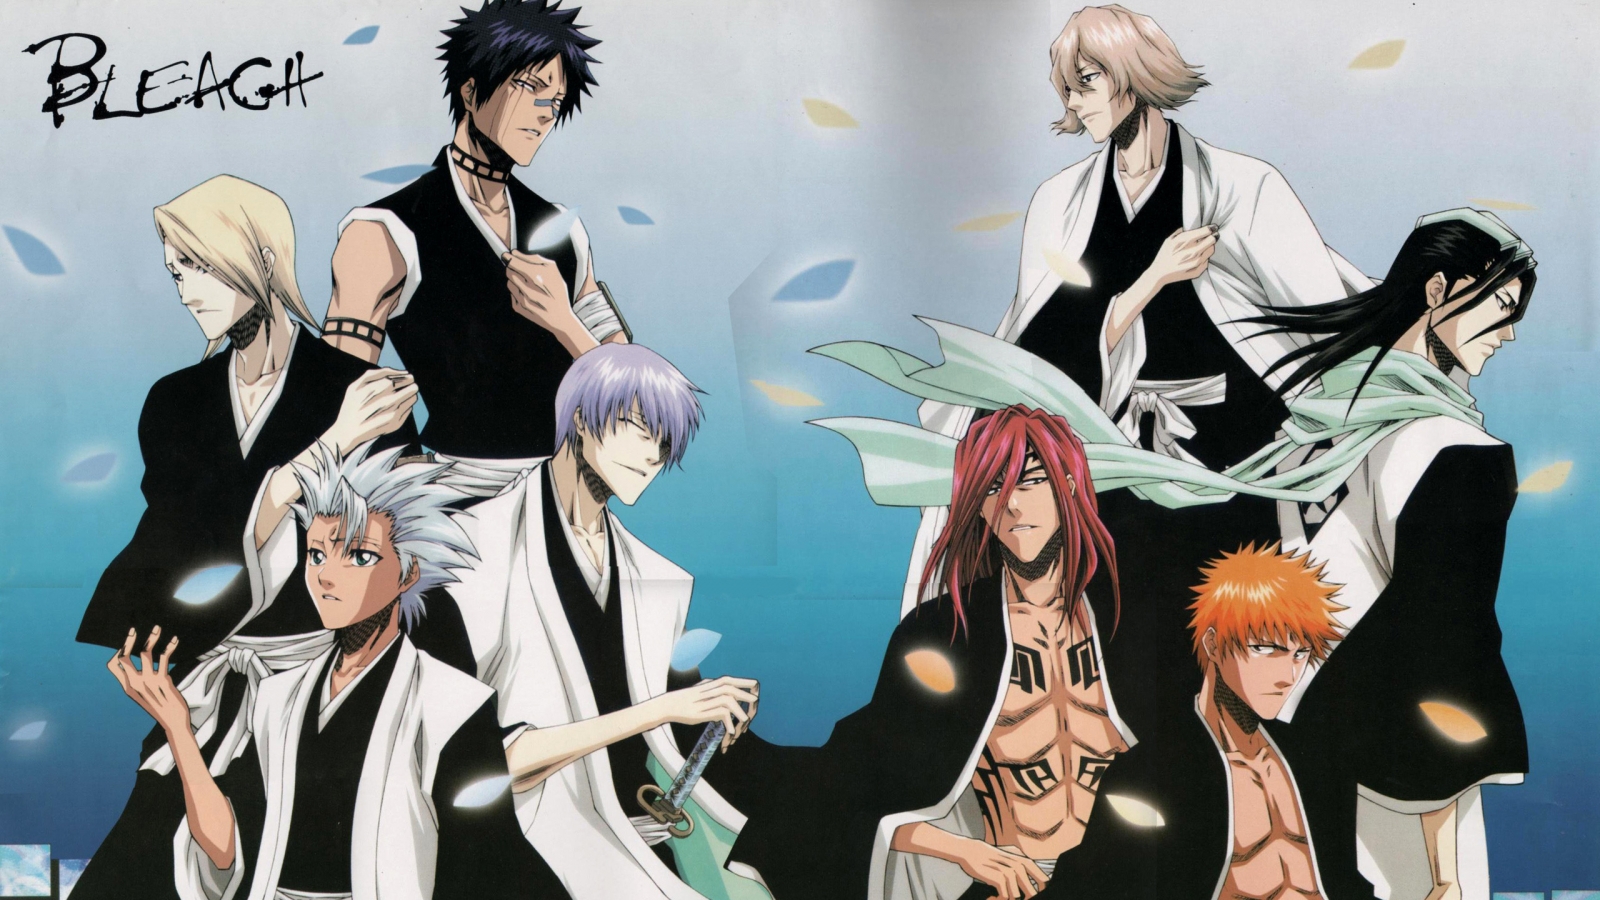 Bleach Anime Characters for 1600 x 900 HDTV resolution